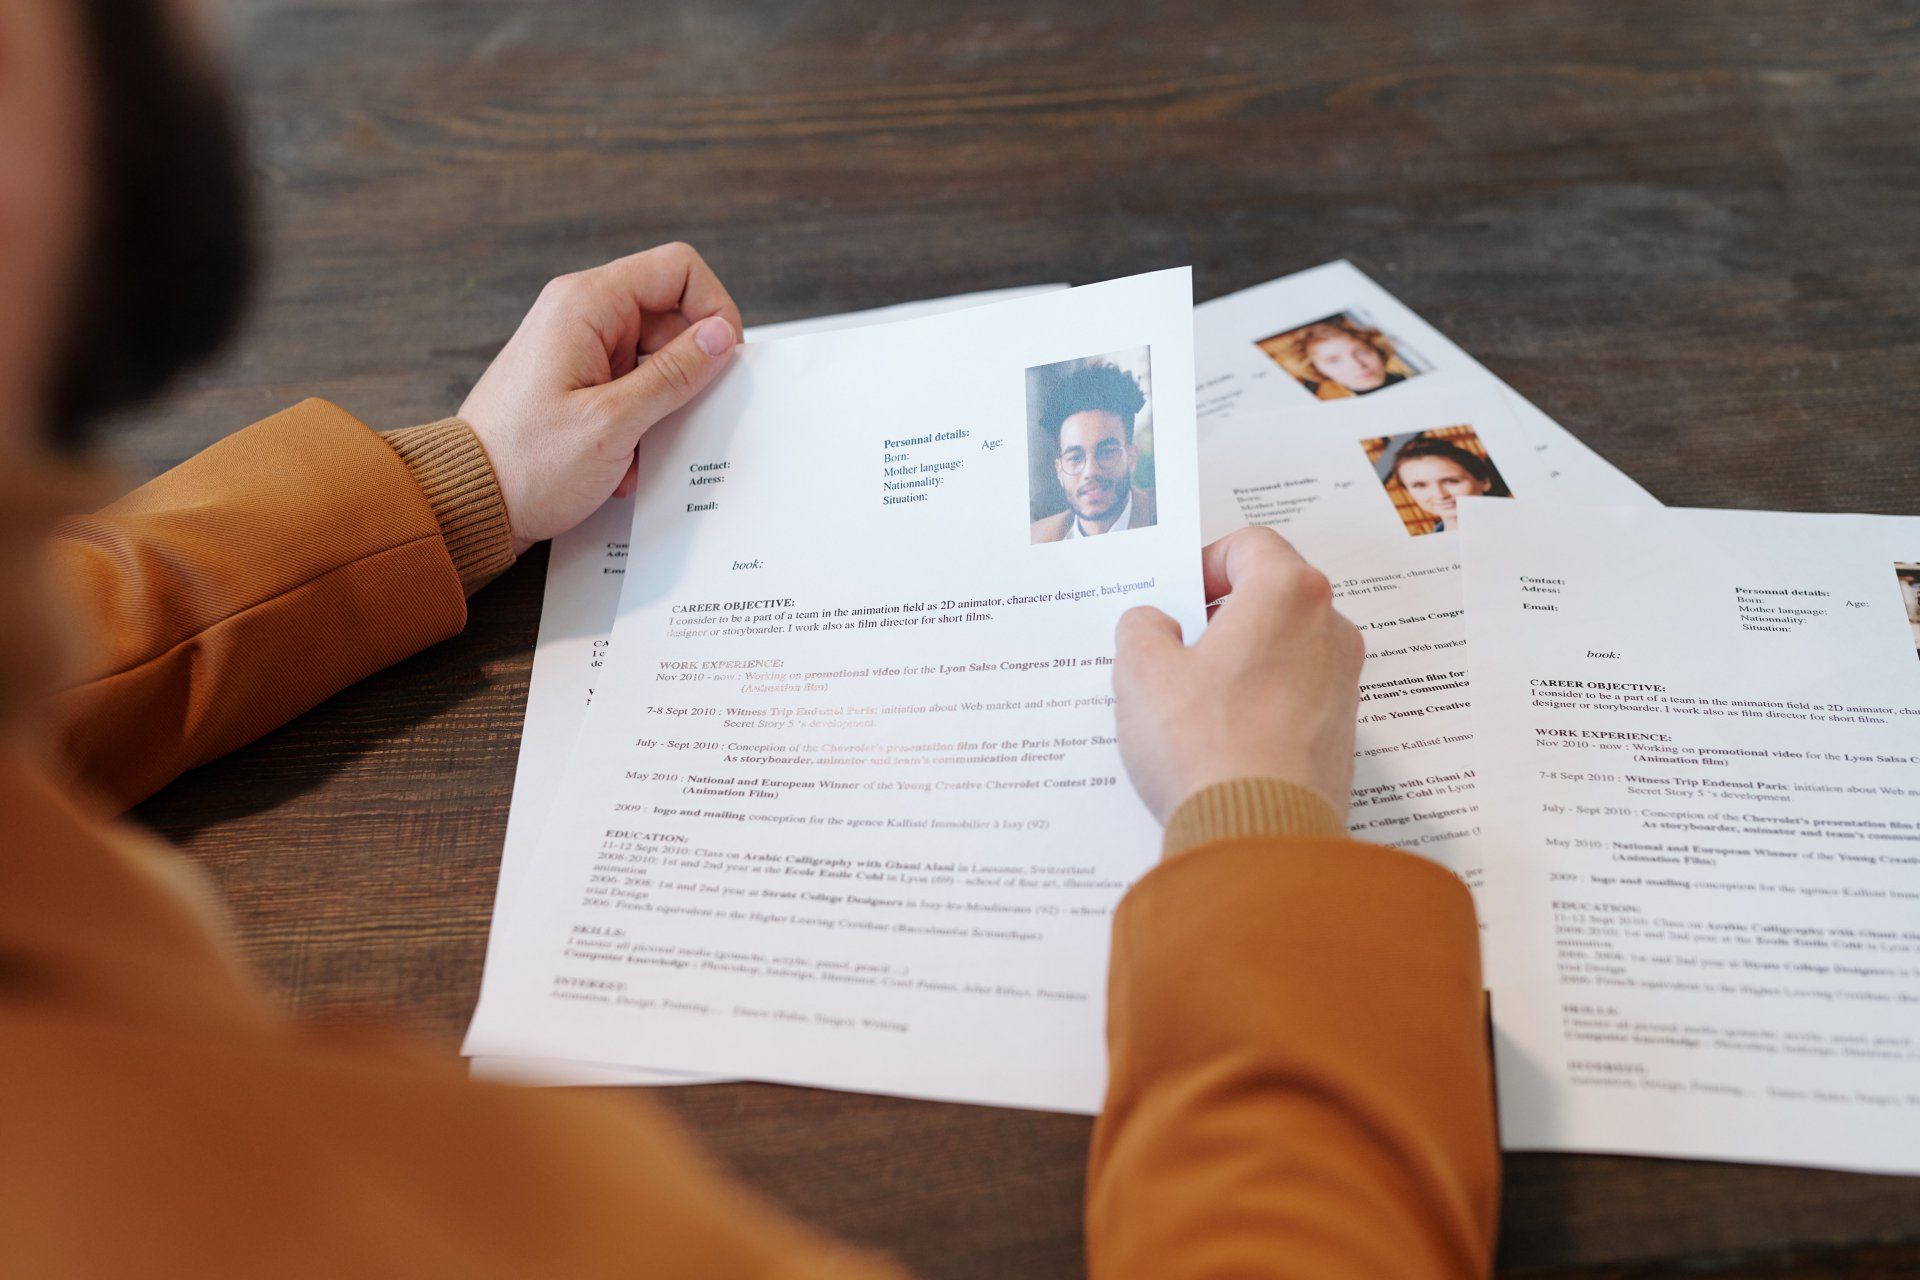 An image looking over the shoulder of an HR recruiter wearing an orange jacket as she sifts through a pile of resumés.